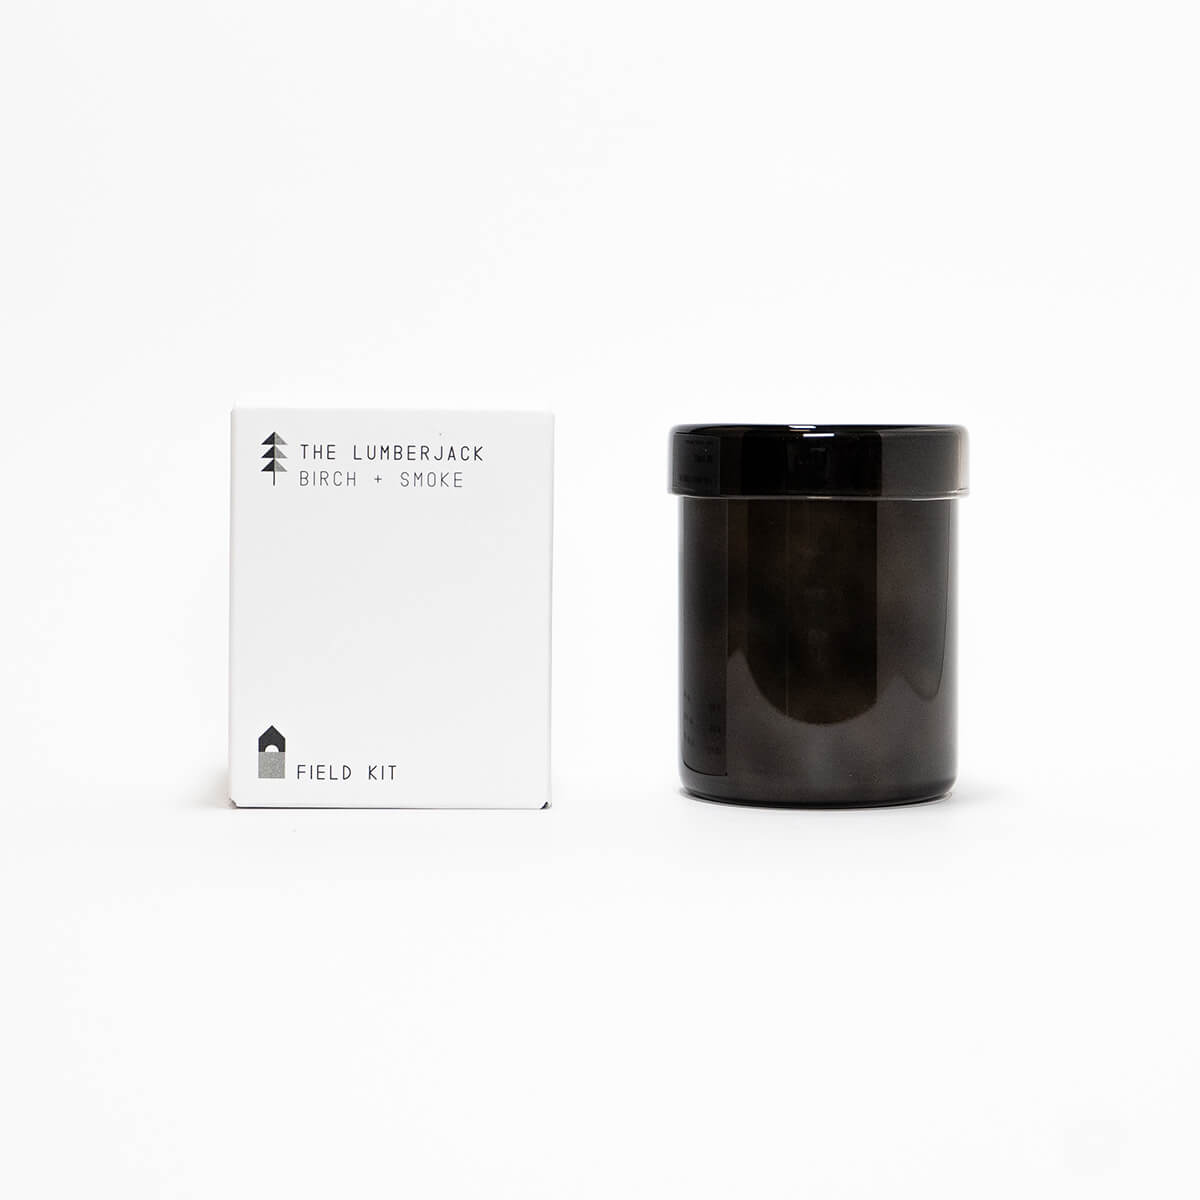 The Lumberjack Scented Candle by Field Kit